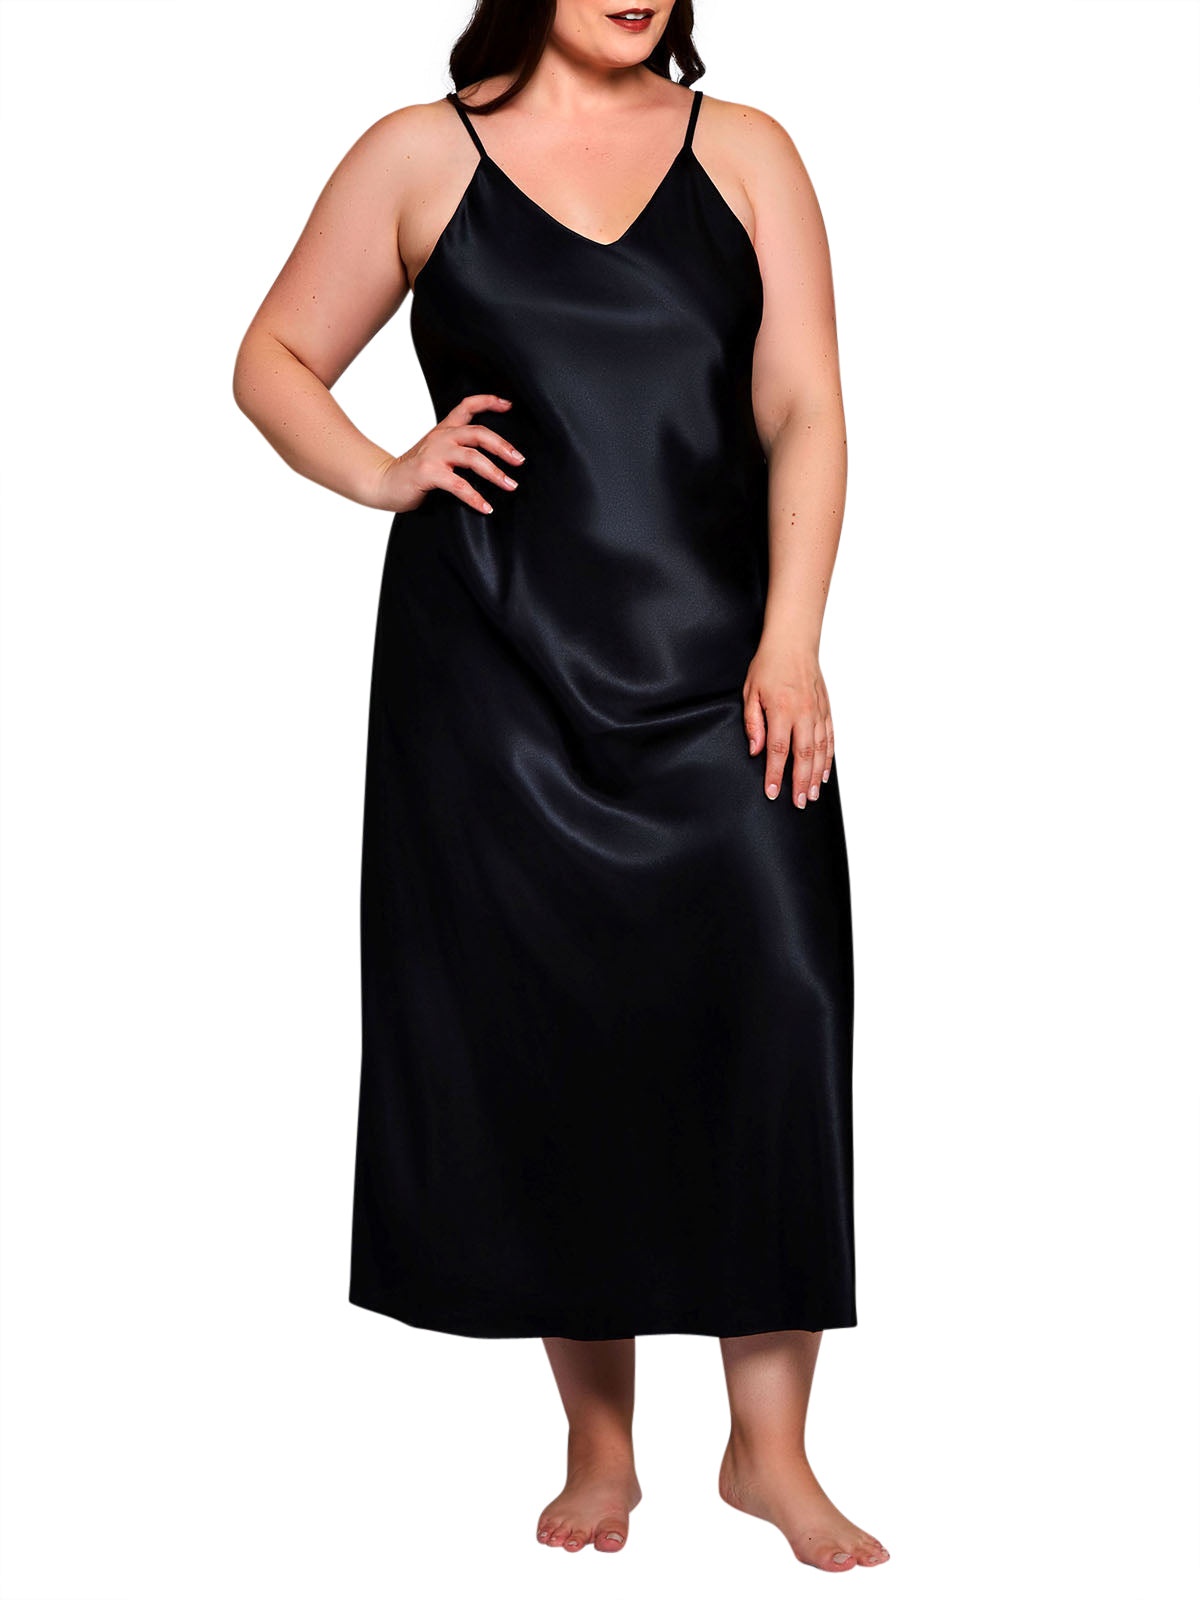 iCollection Plus Size Gown Victoria Plus Size Gown